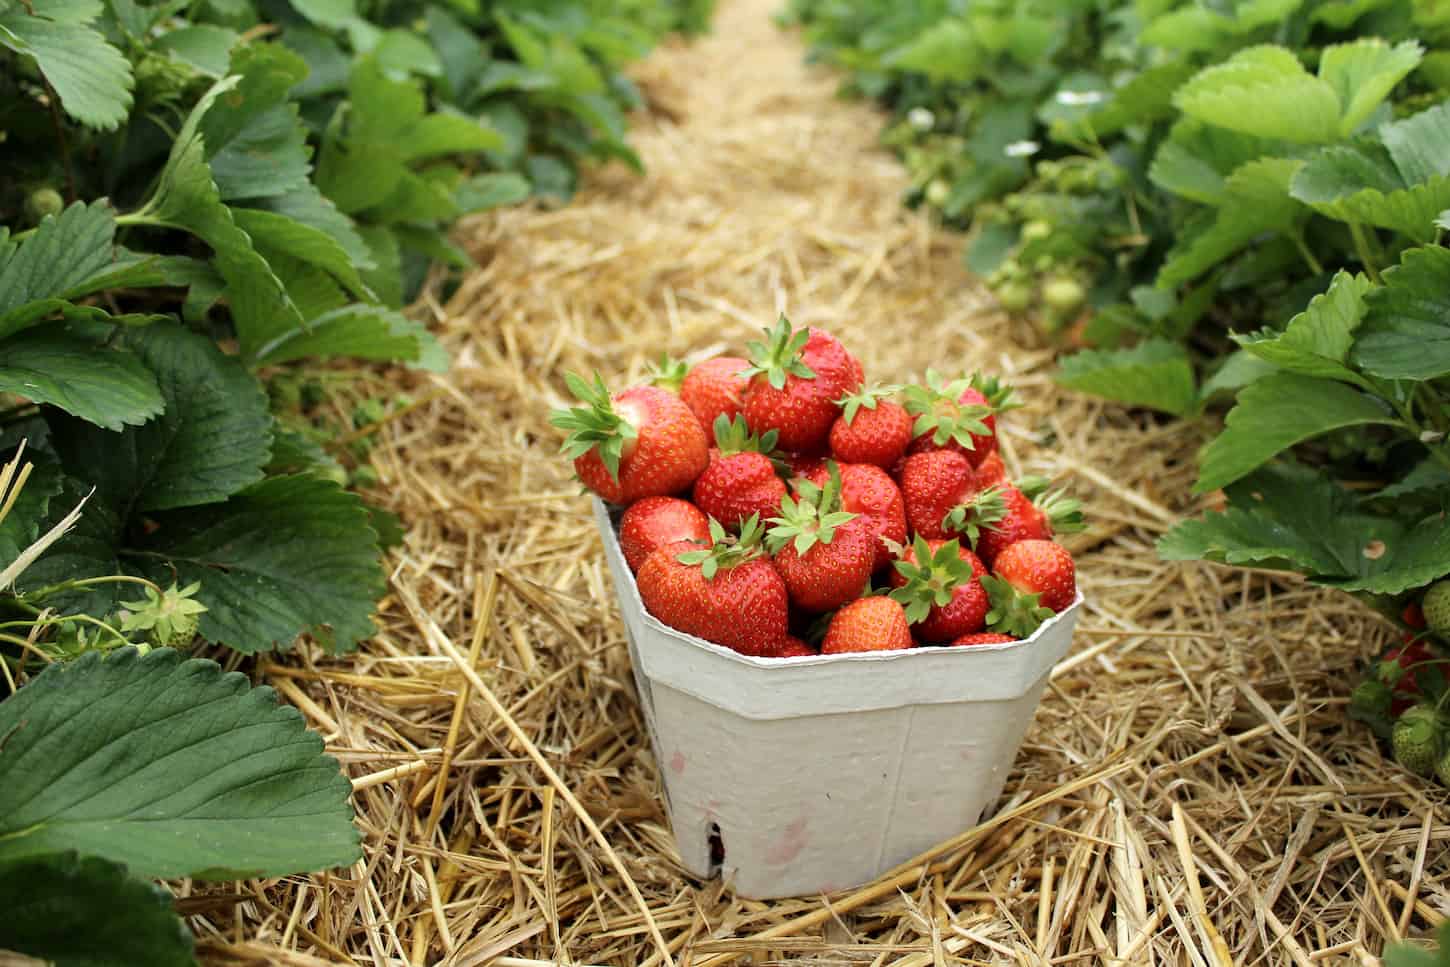 An image of freshly picked strawberries in a white bucket on a strawberry field.